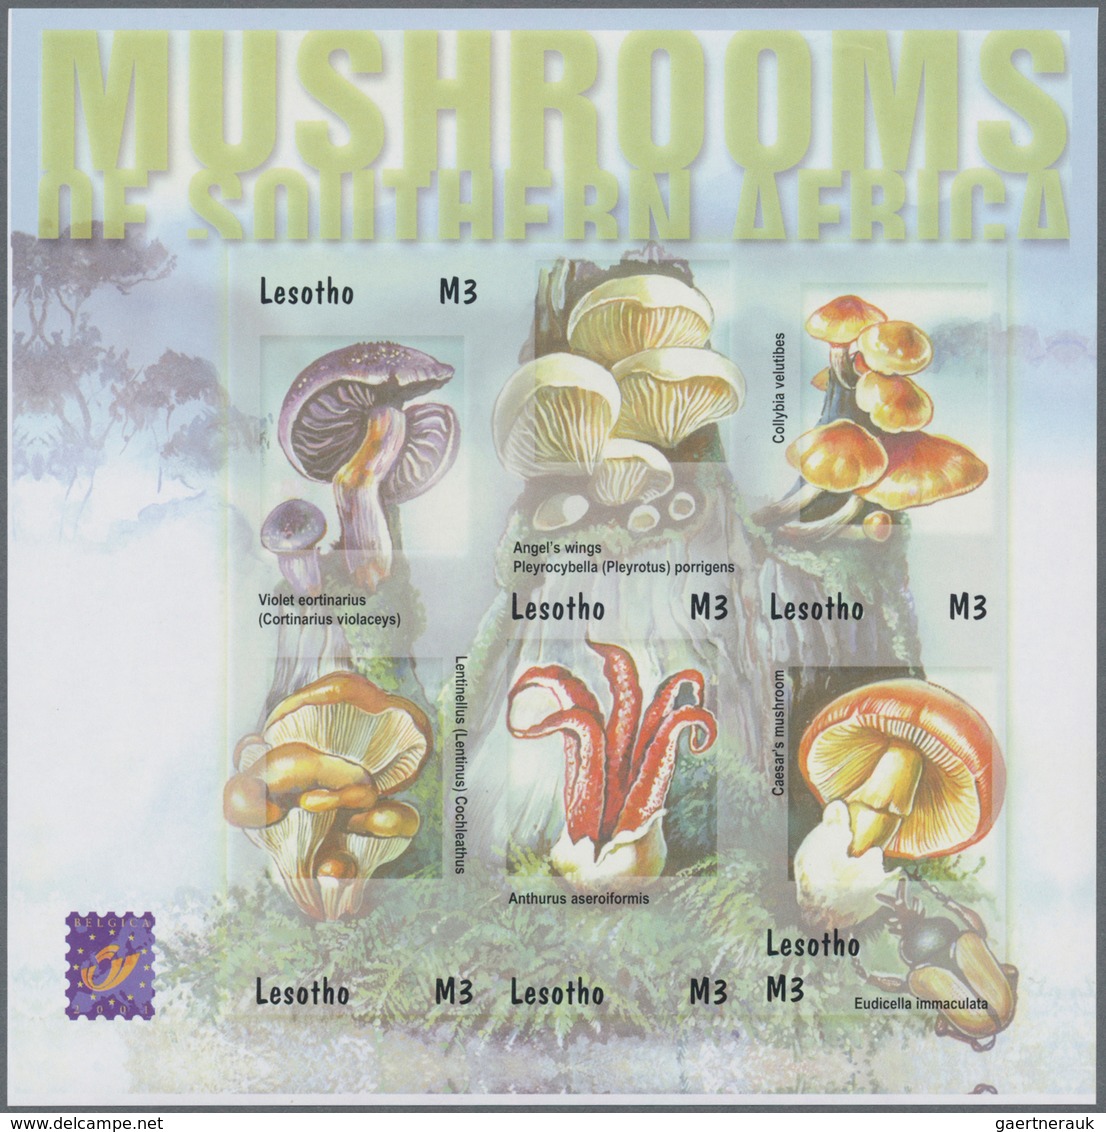 Lesotho: 2001, Mushrooms in Southern Africa complete IMPERFORATE set of four from upper or lower mar